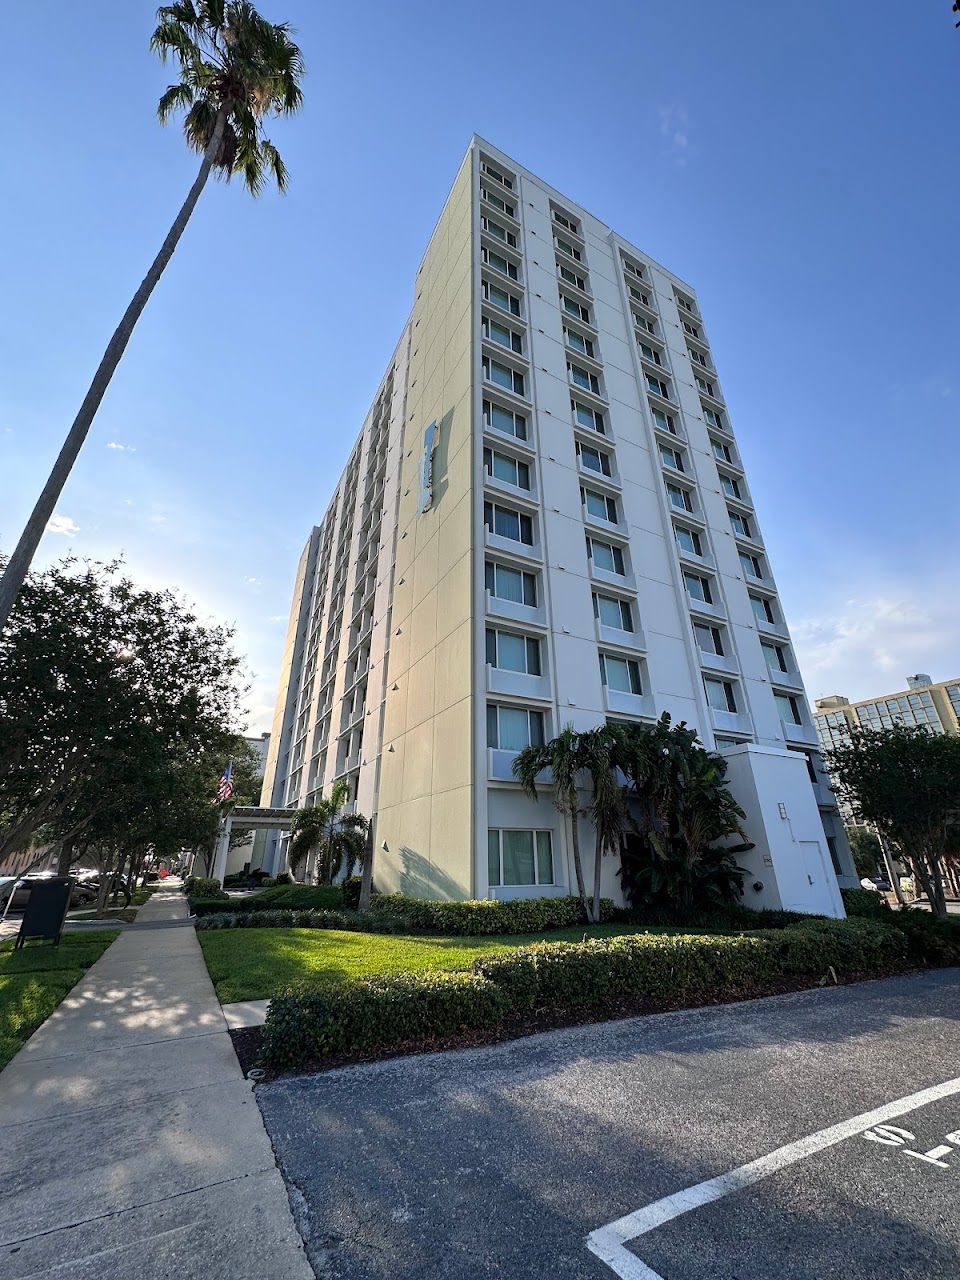 Photo of 540 TOWN CENTER at 540 SECOND AVE. SOUTH ST PETERSBURG, FL 33701